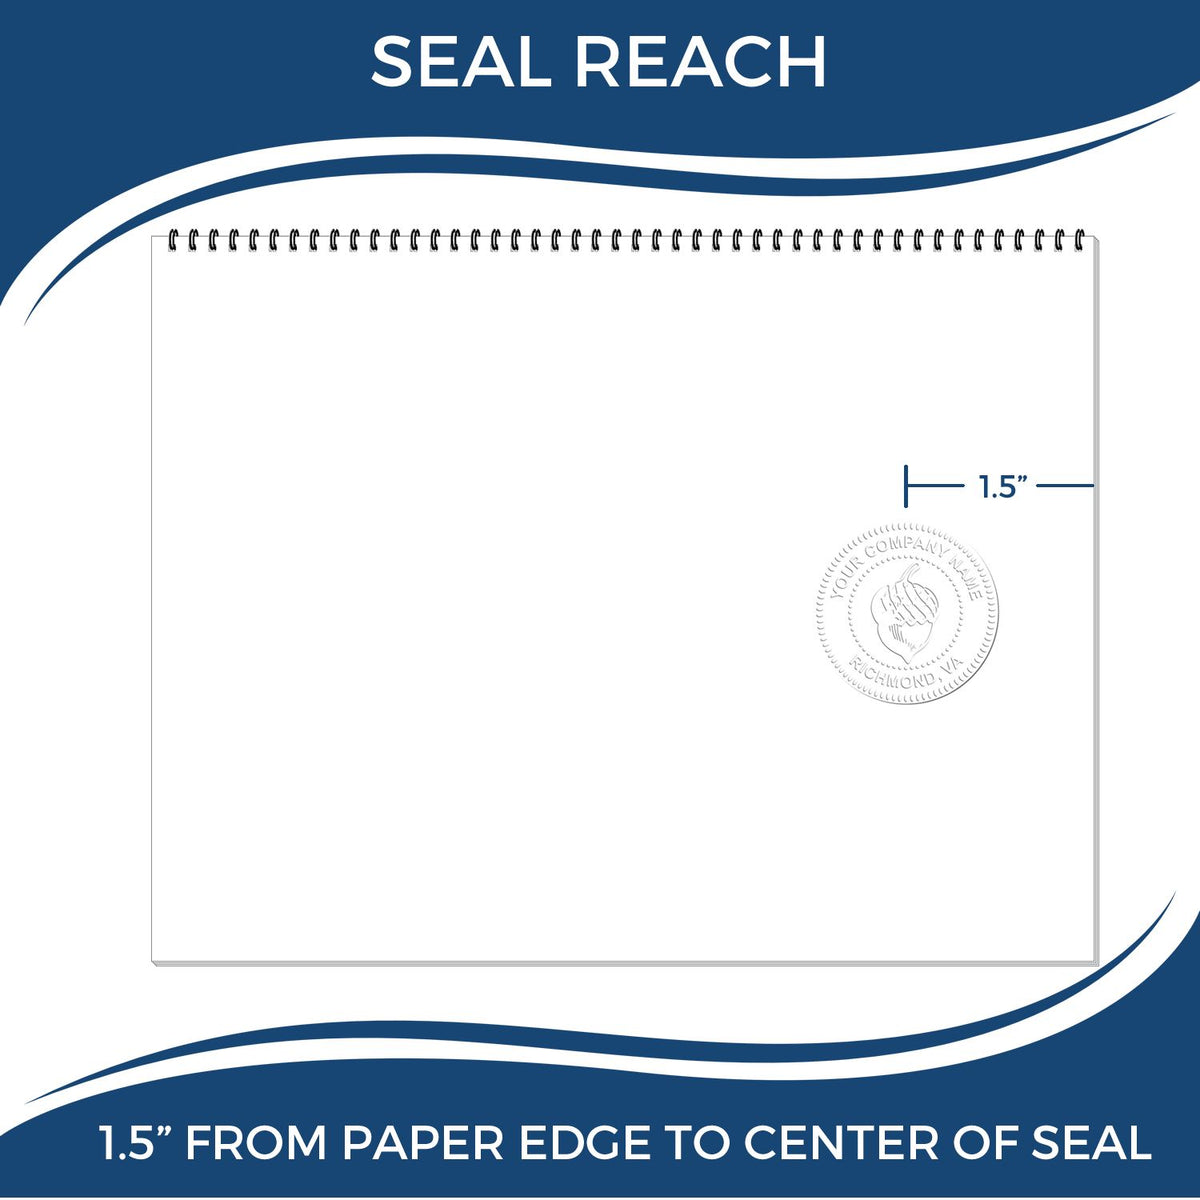 An infographic showing the seal reach which is represented by a ruler and a miniature seal image of the Hybrid Delaware Engineer Seal